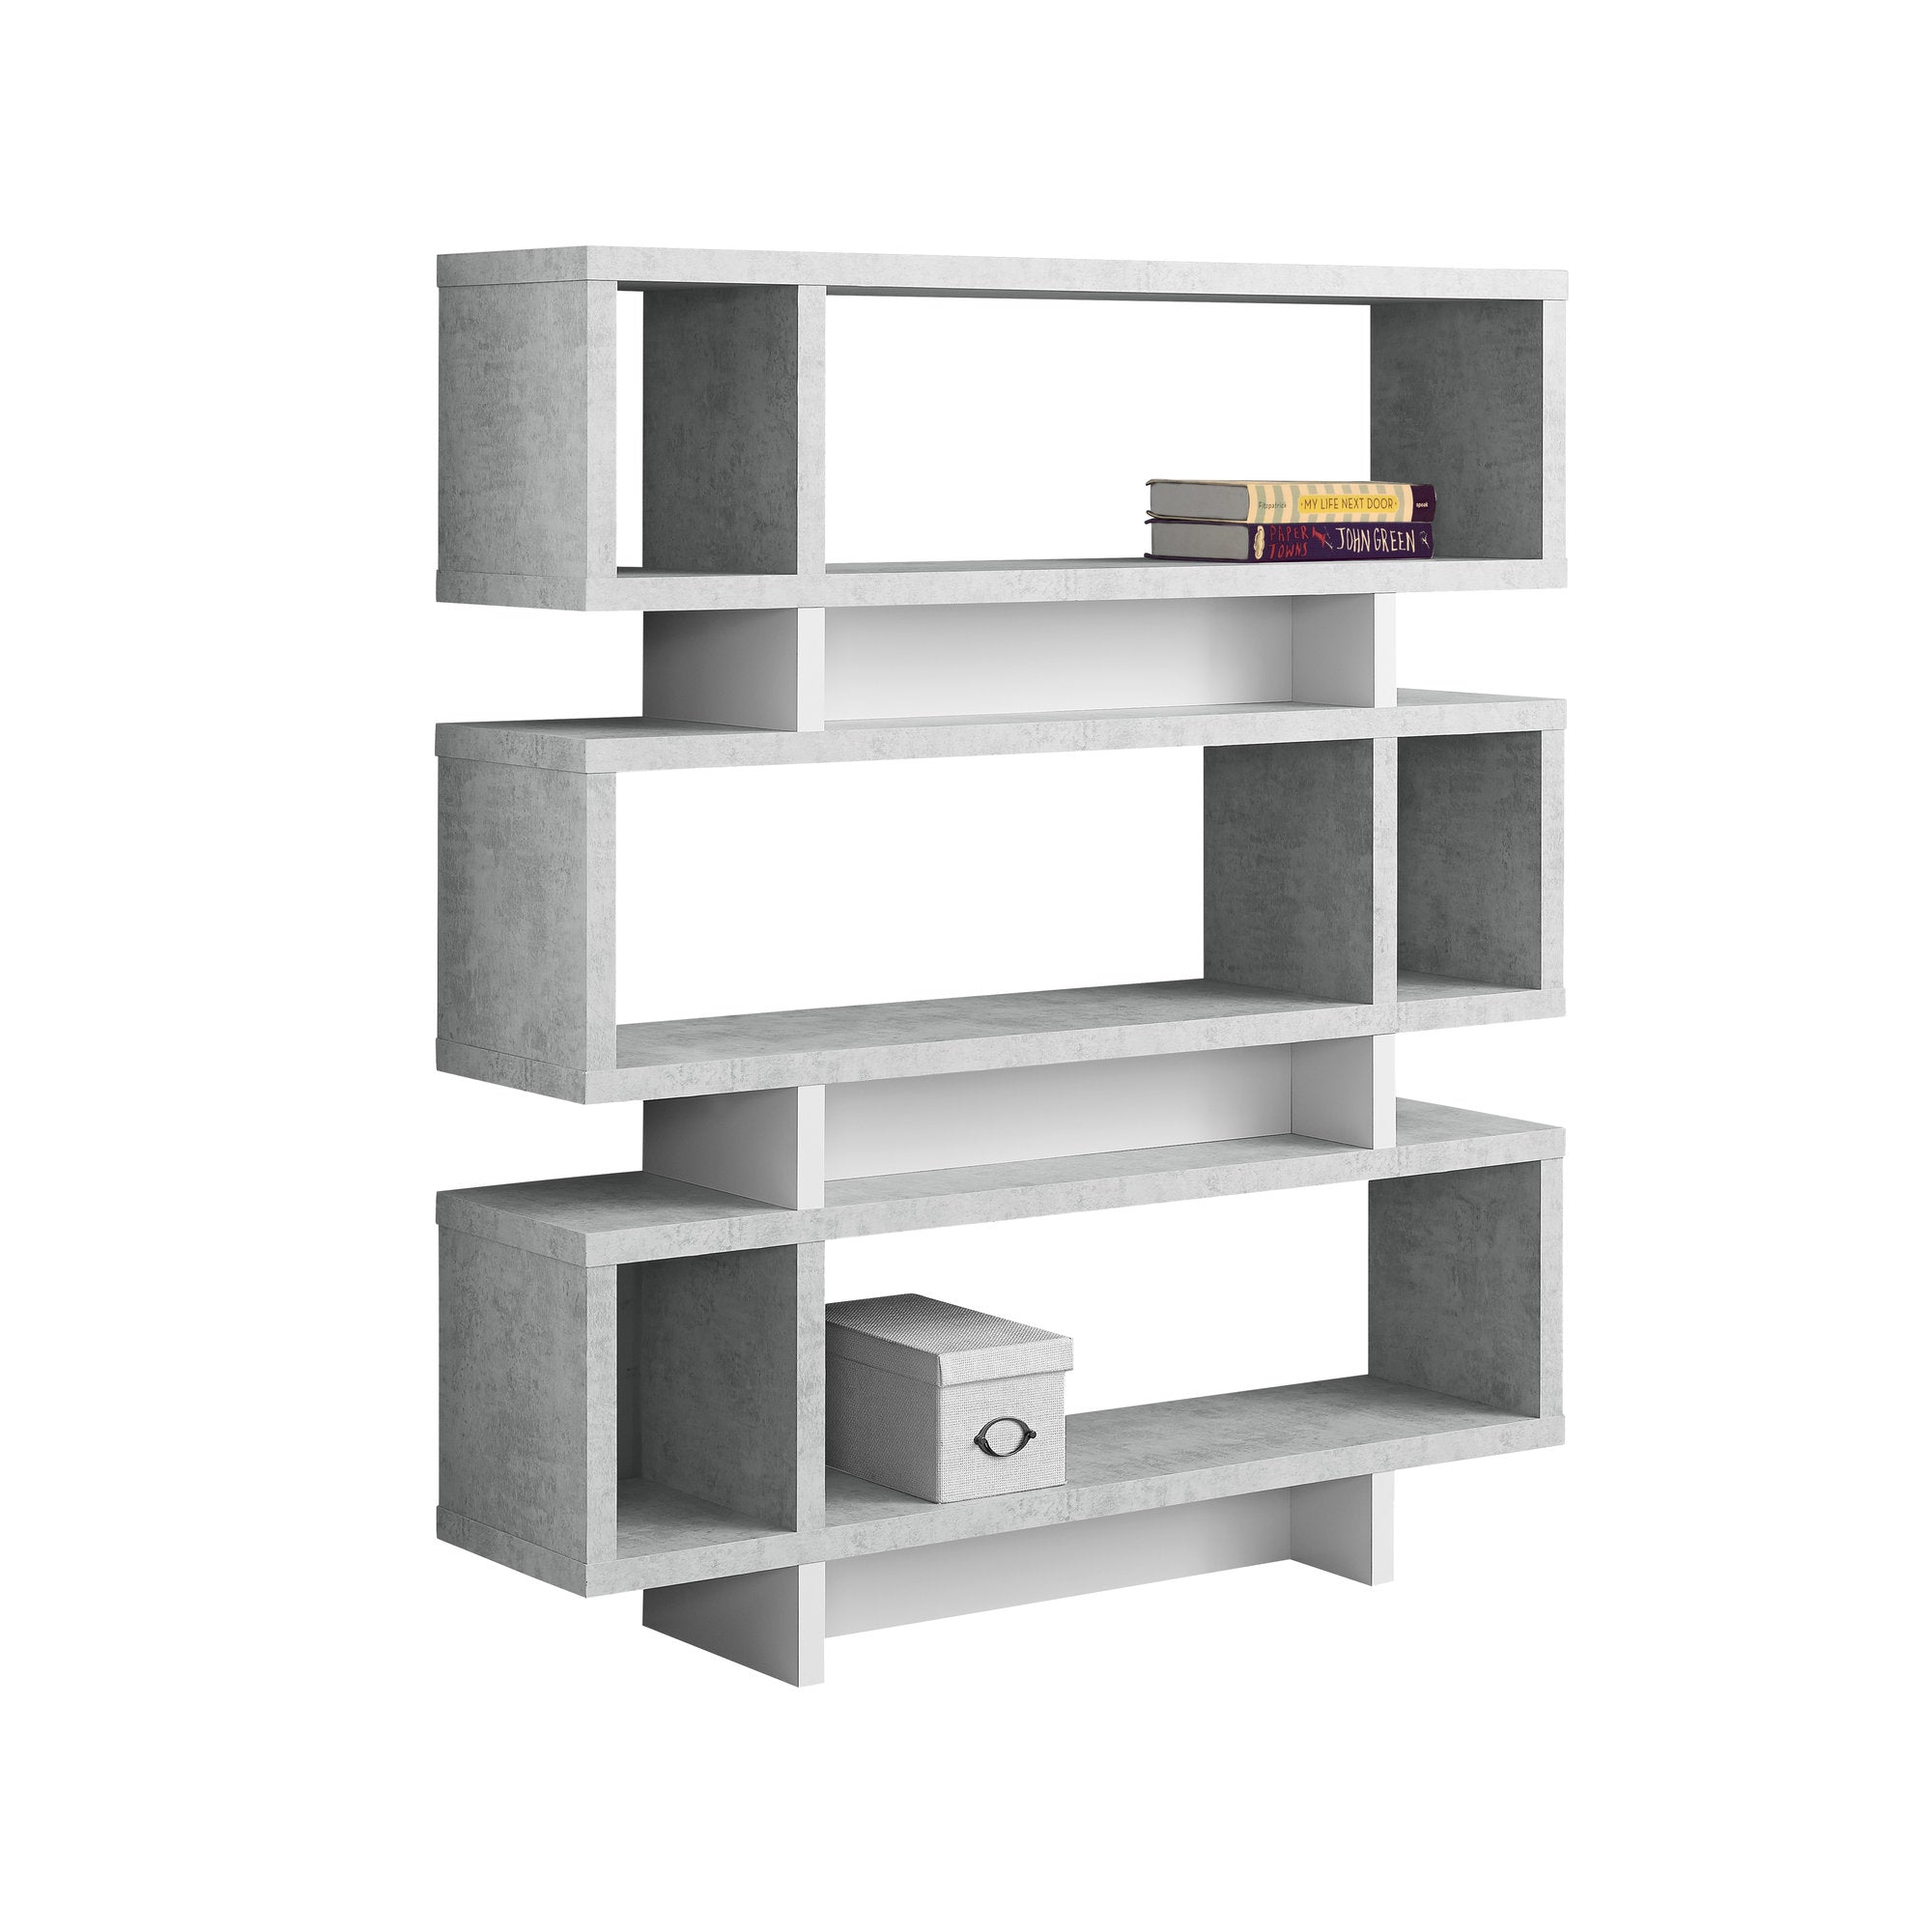 55" Gray Wood Floating Bookcase